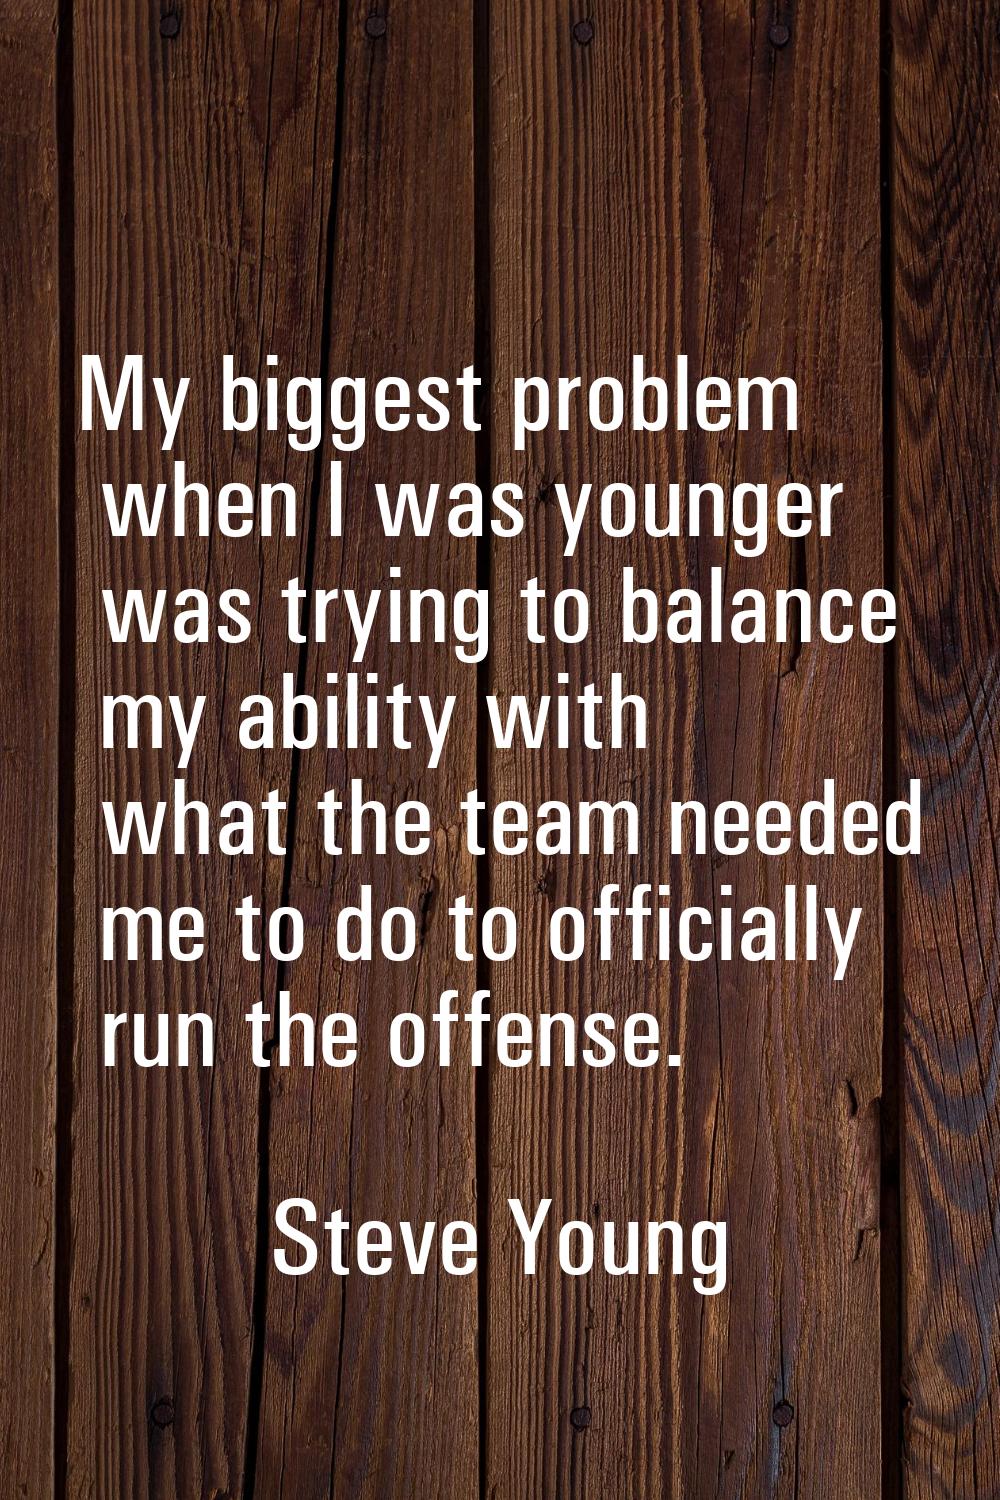 My biggest problem when I was younger was trying to balance my ability with what the team needed me